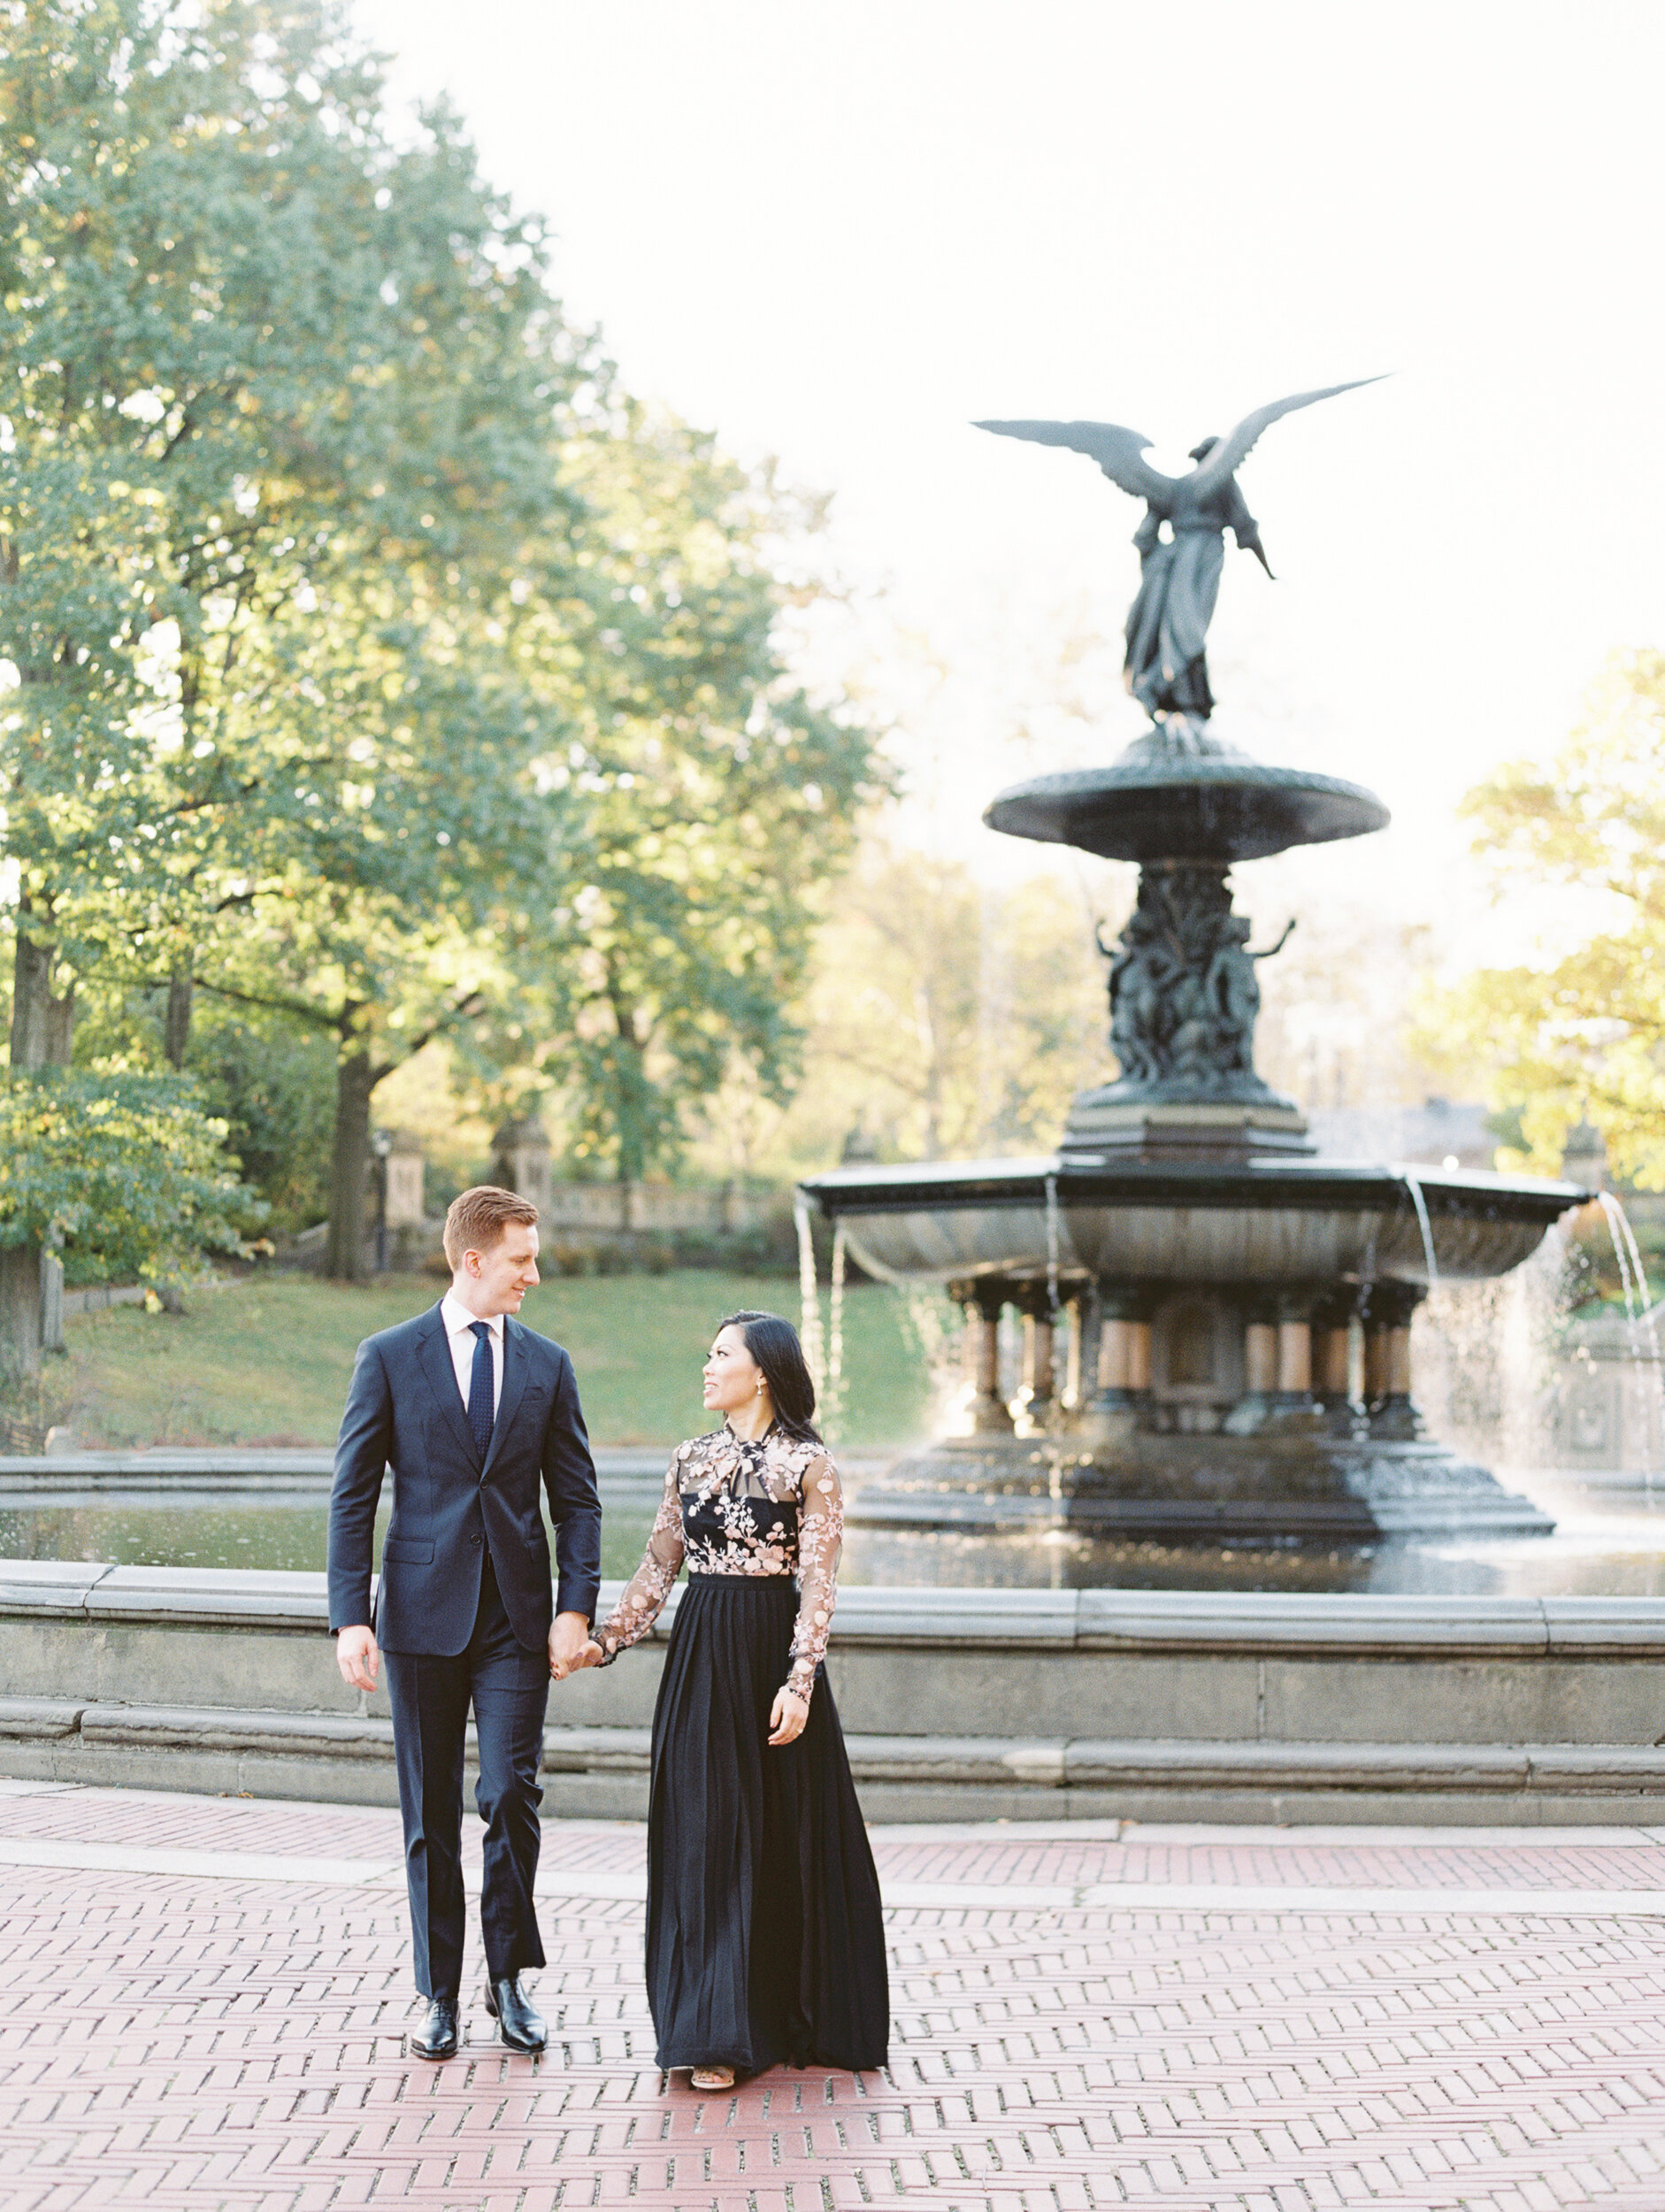 A Royal Inspired Engagement Session Photos